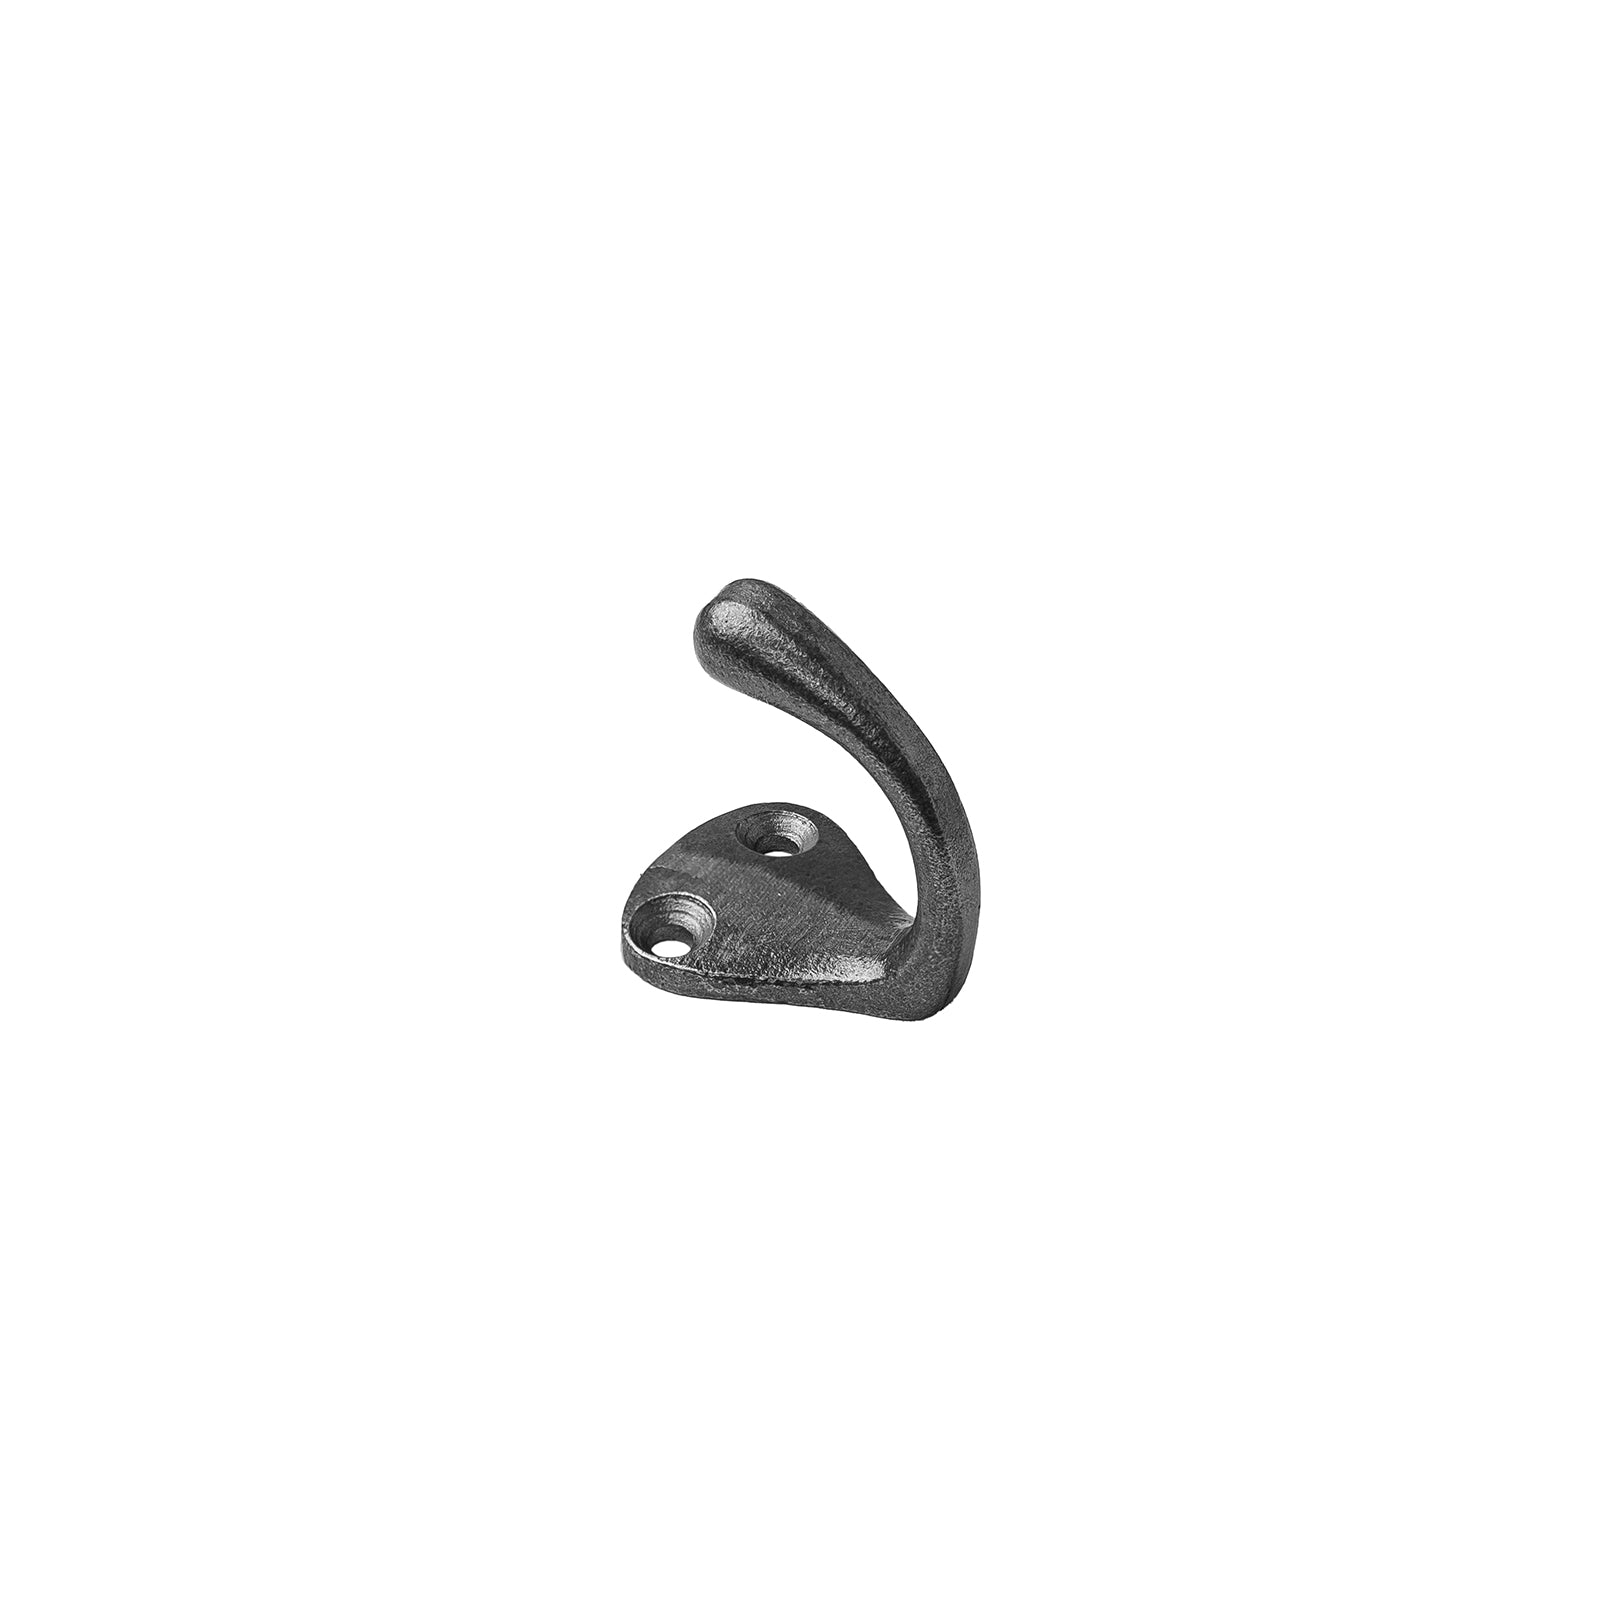 Single Small Cast iron Robe Hook in Antique Iron Finish